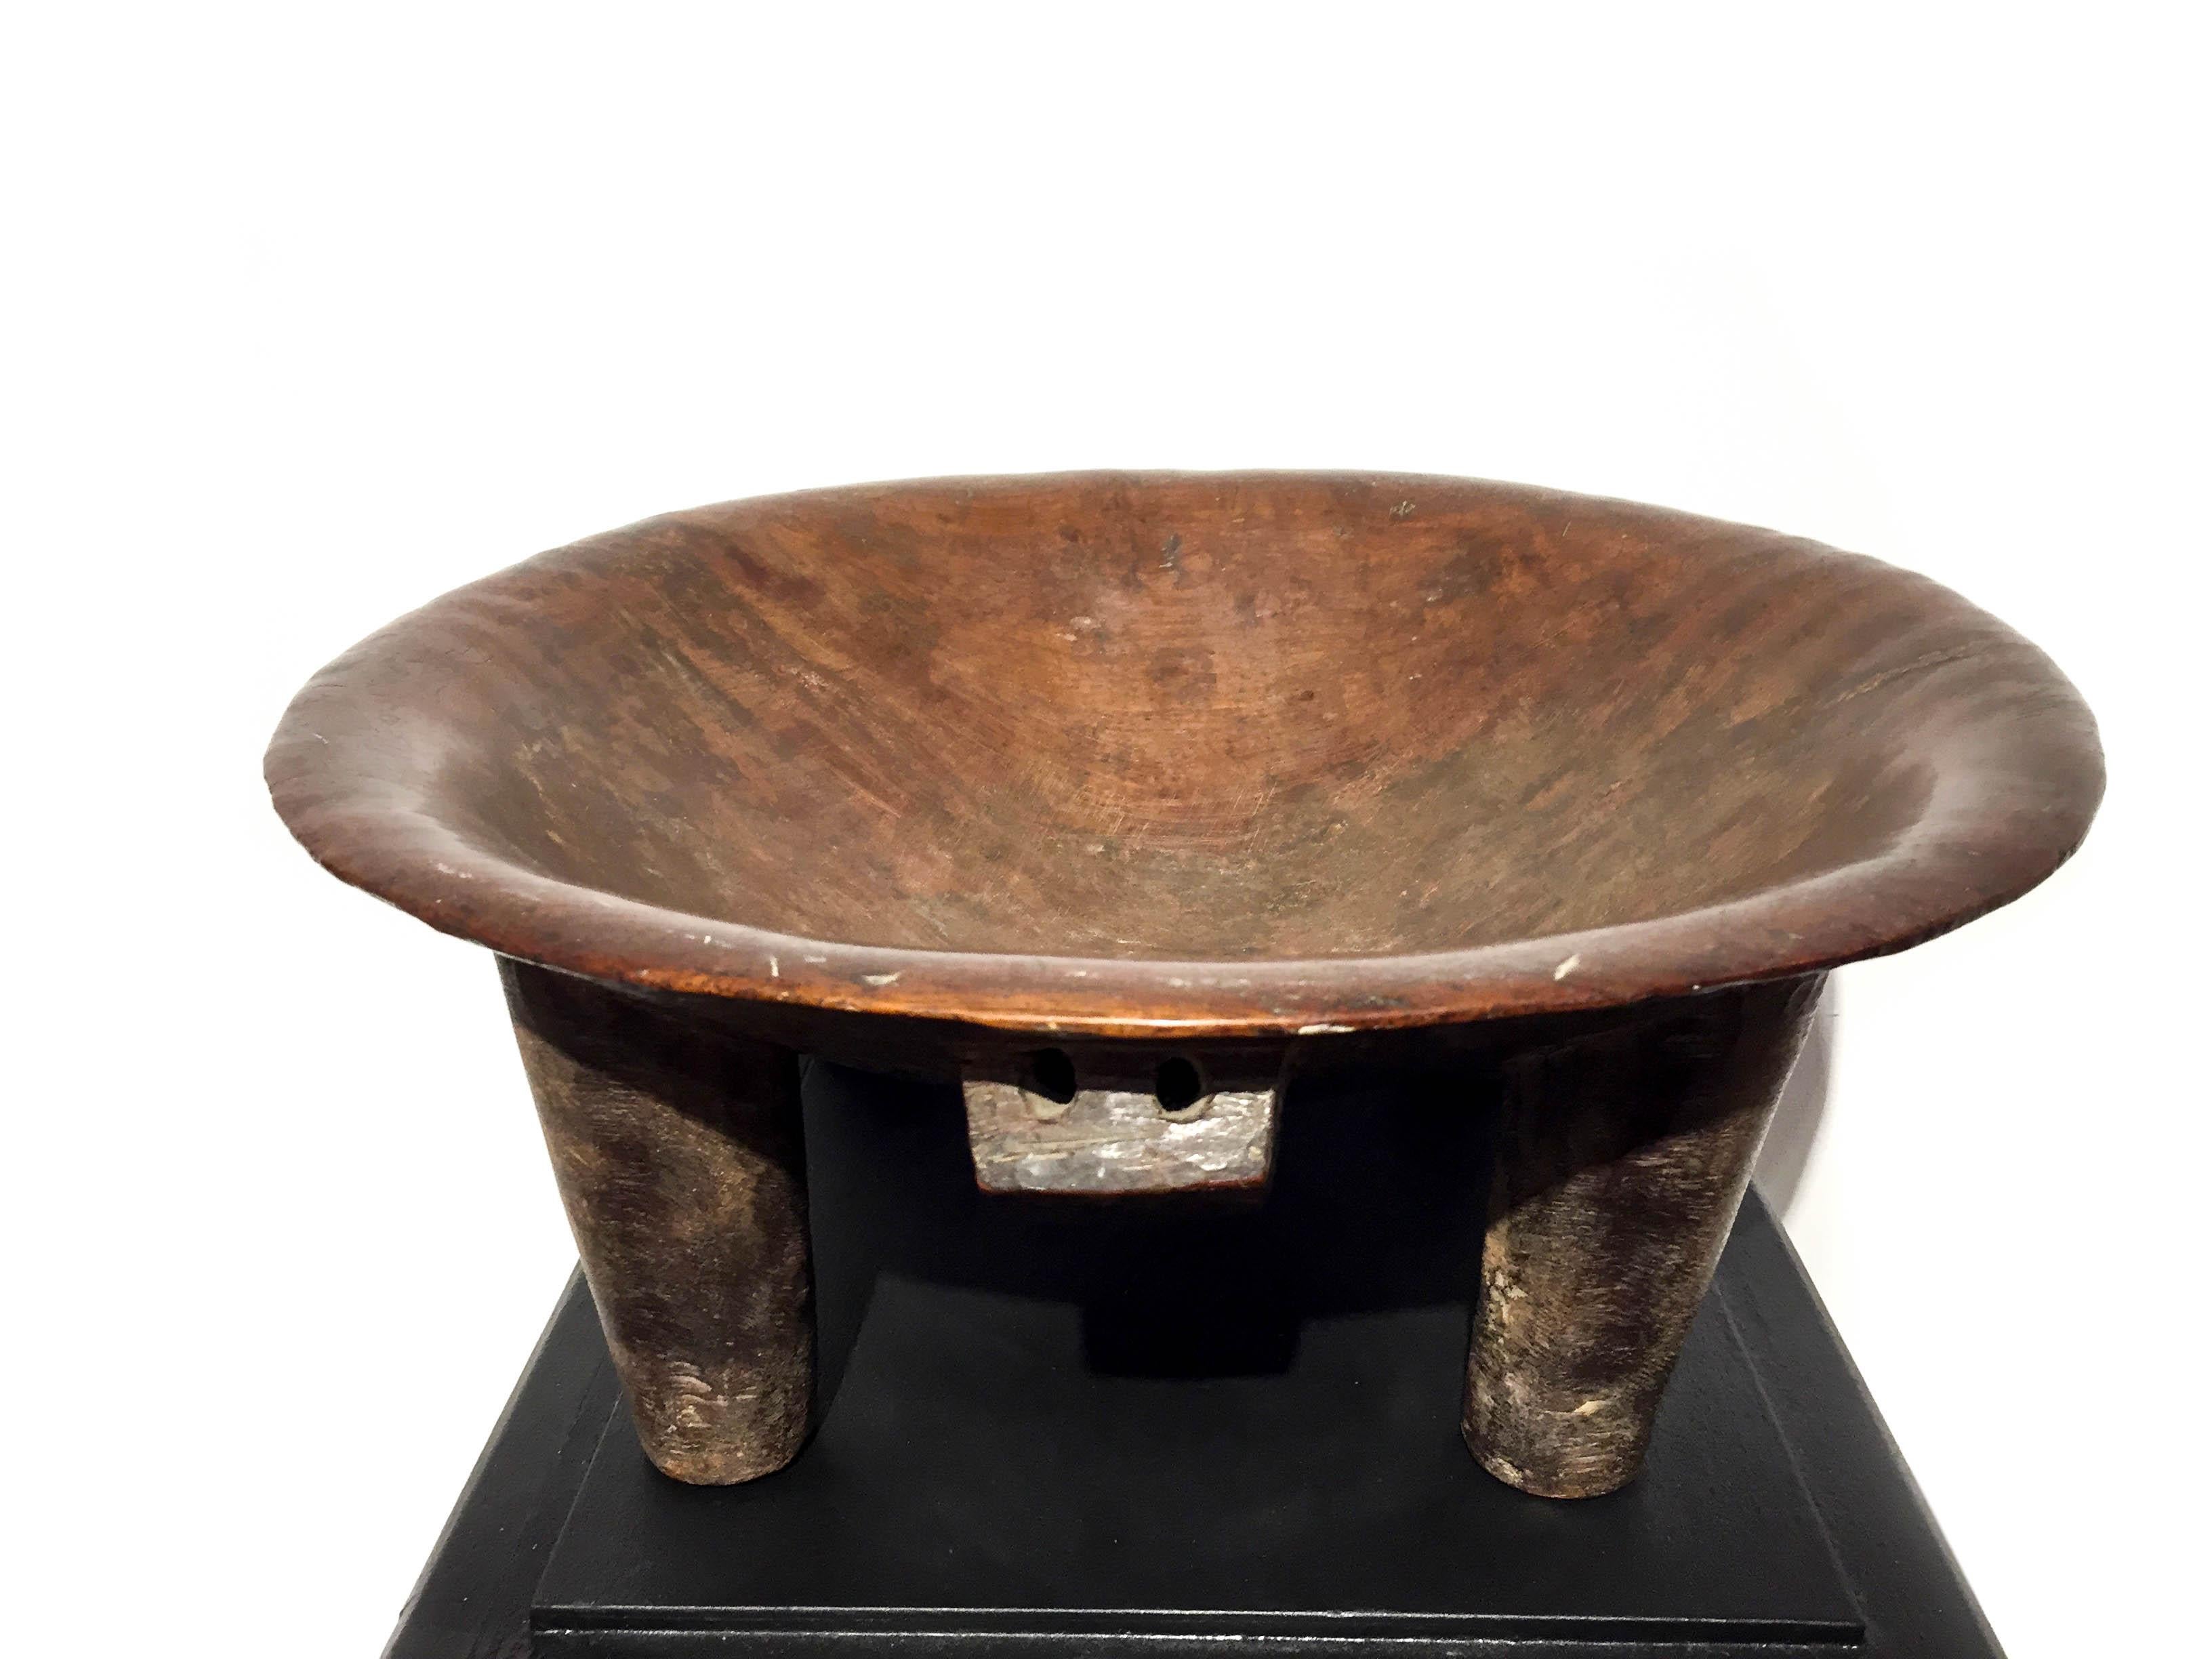 Fiji Yaqona bowl D 39cm, H 16.5 cm. Definite signs of use, adze carved, deep red brown patina. Used in ceremonies to make Yaqona,
Yaqona - made from the roots of the pepper plant, Piper methysticum.
